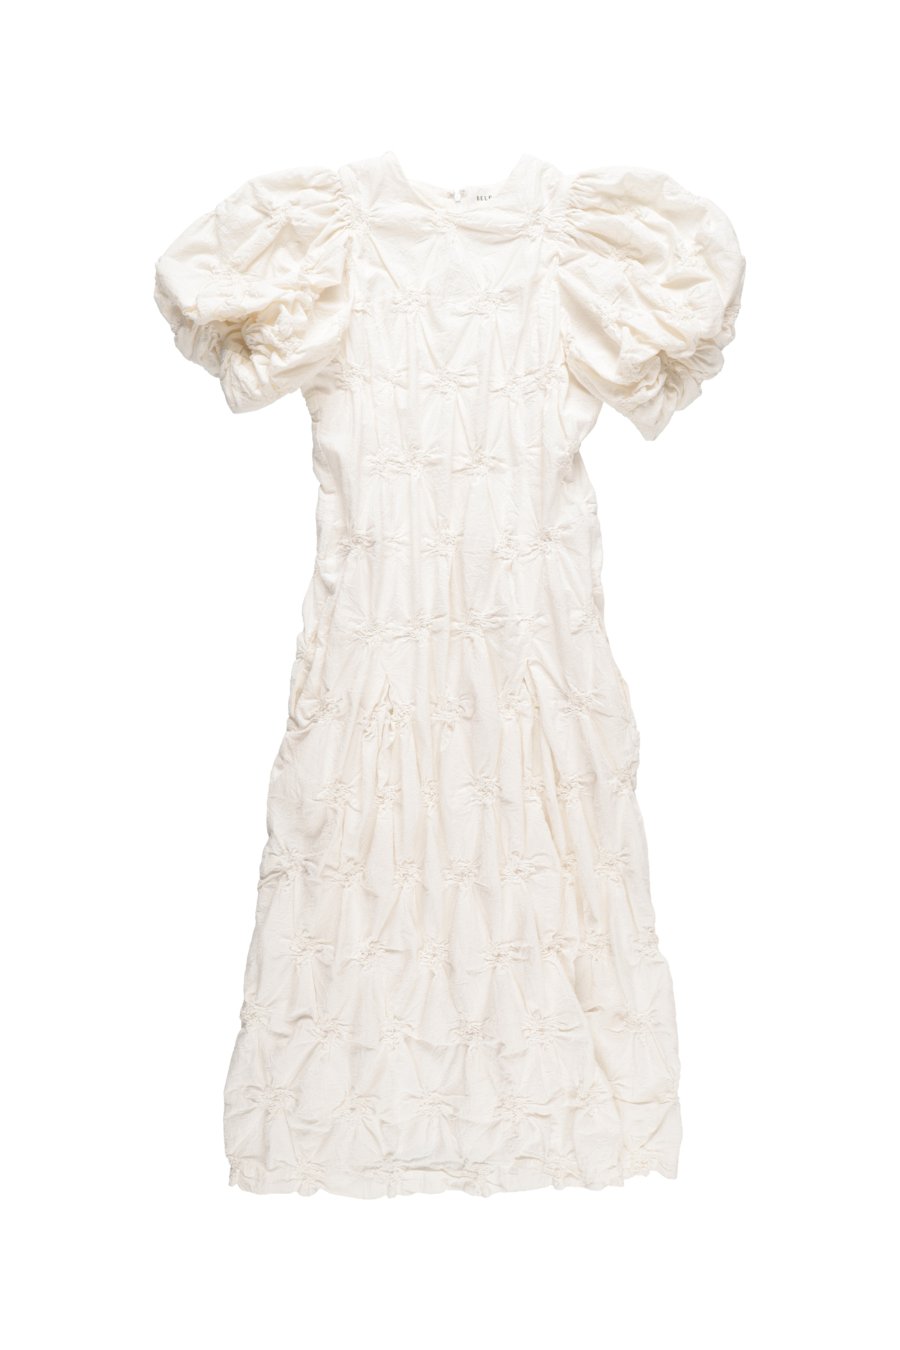 BELPER  EMBROIDERY LINEN DRESS<img class='new_mark_img2' src='https://img.shop-pro.jp/img/new/icons15.gif' style='border:none;display:inline;margin:0px;padding:0px;width:auto;' />